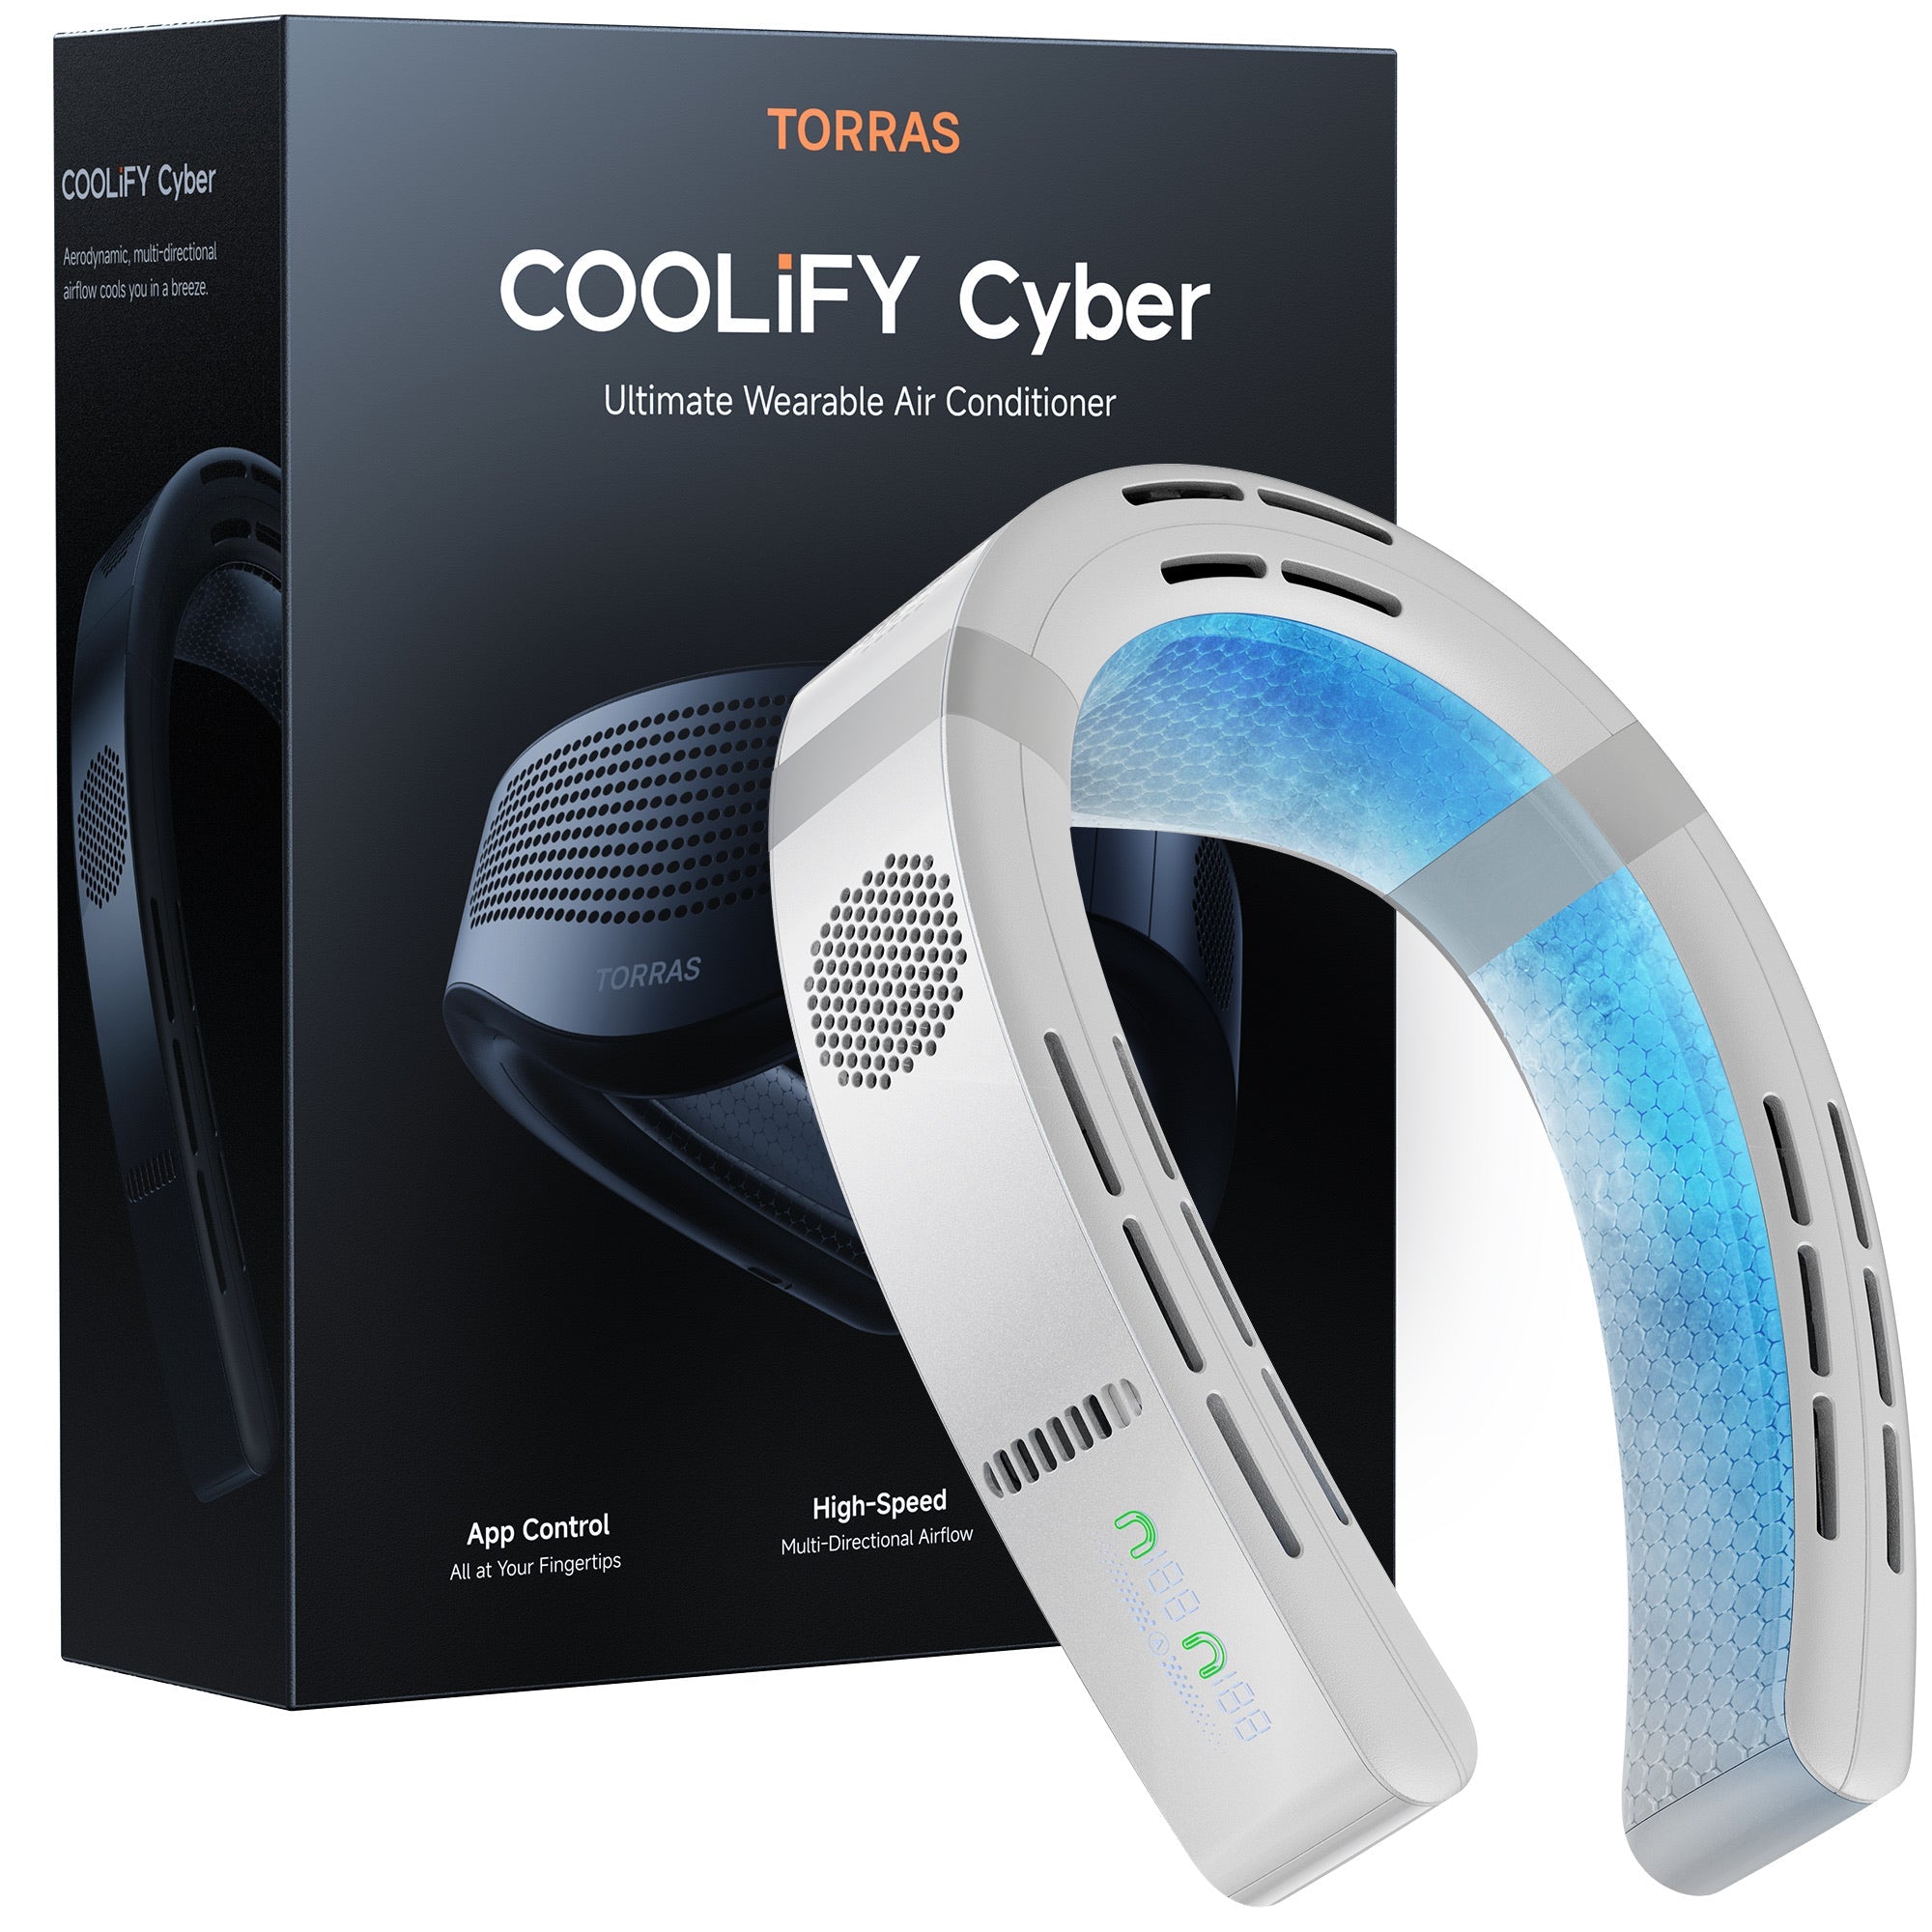 Bundle] COOLiFY Cyber Neck Air Conditioner * 2